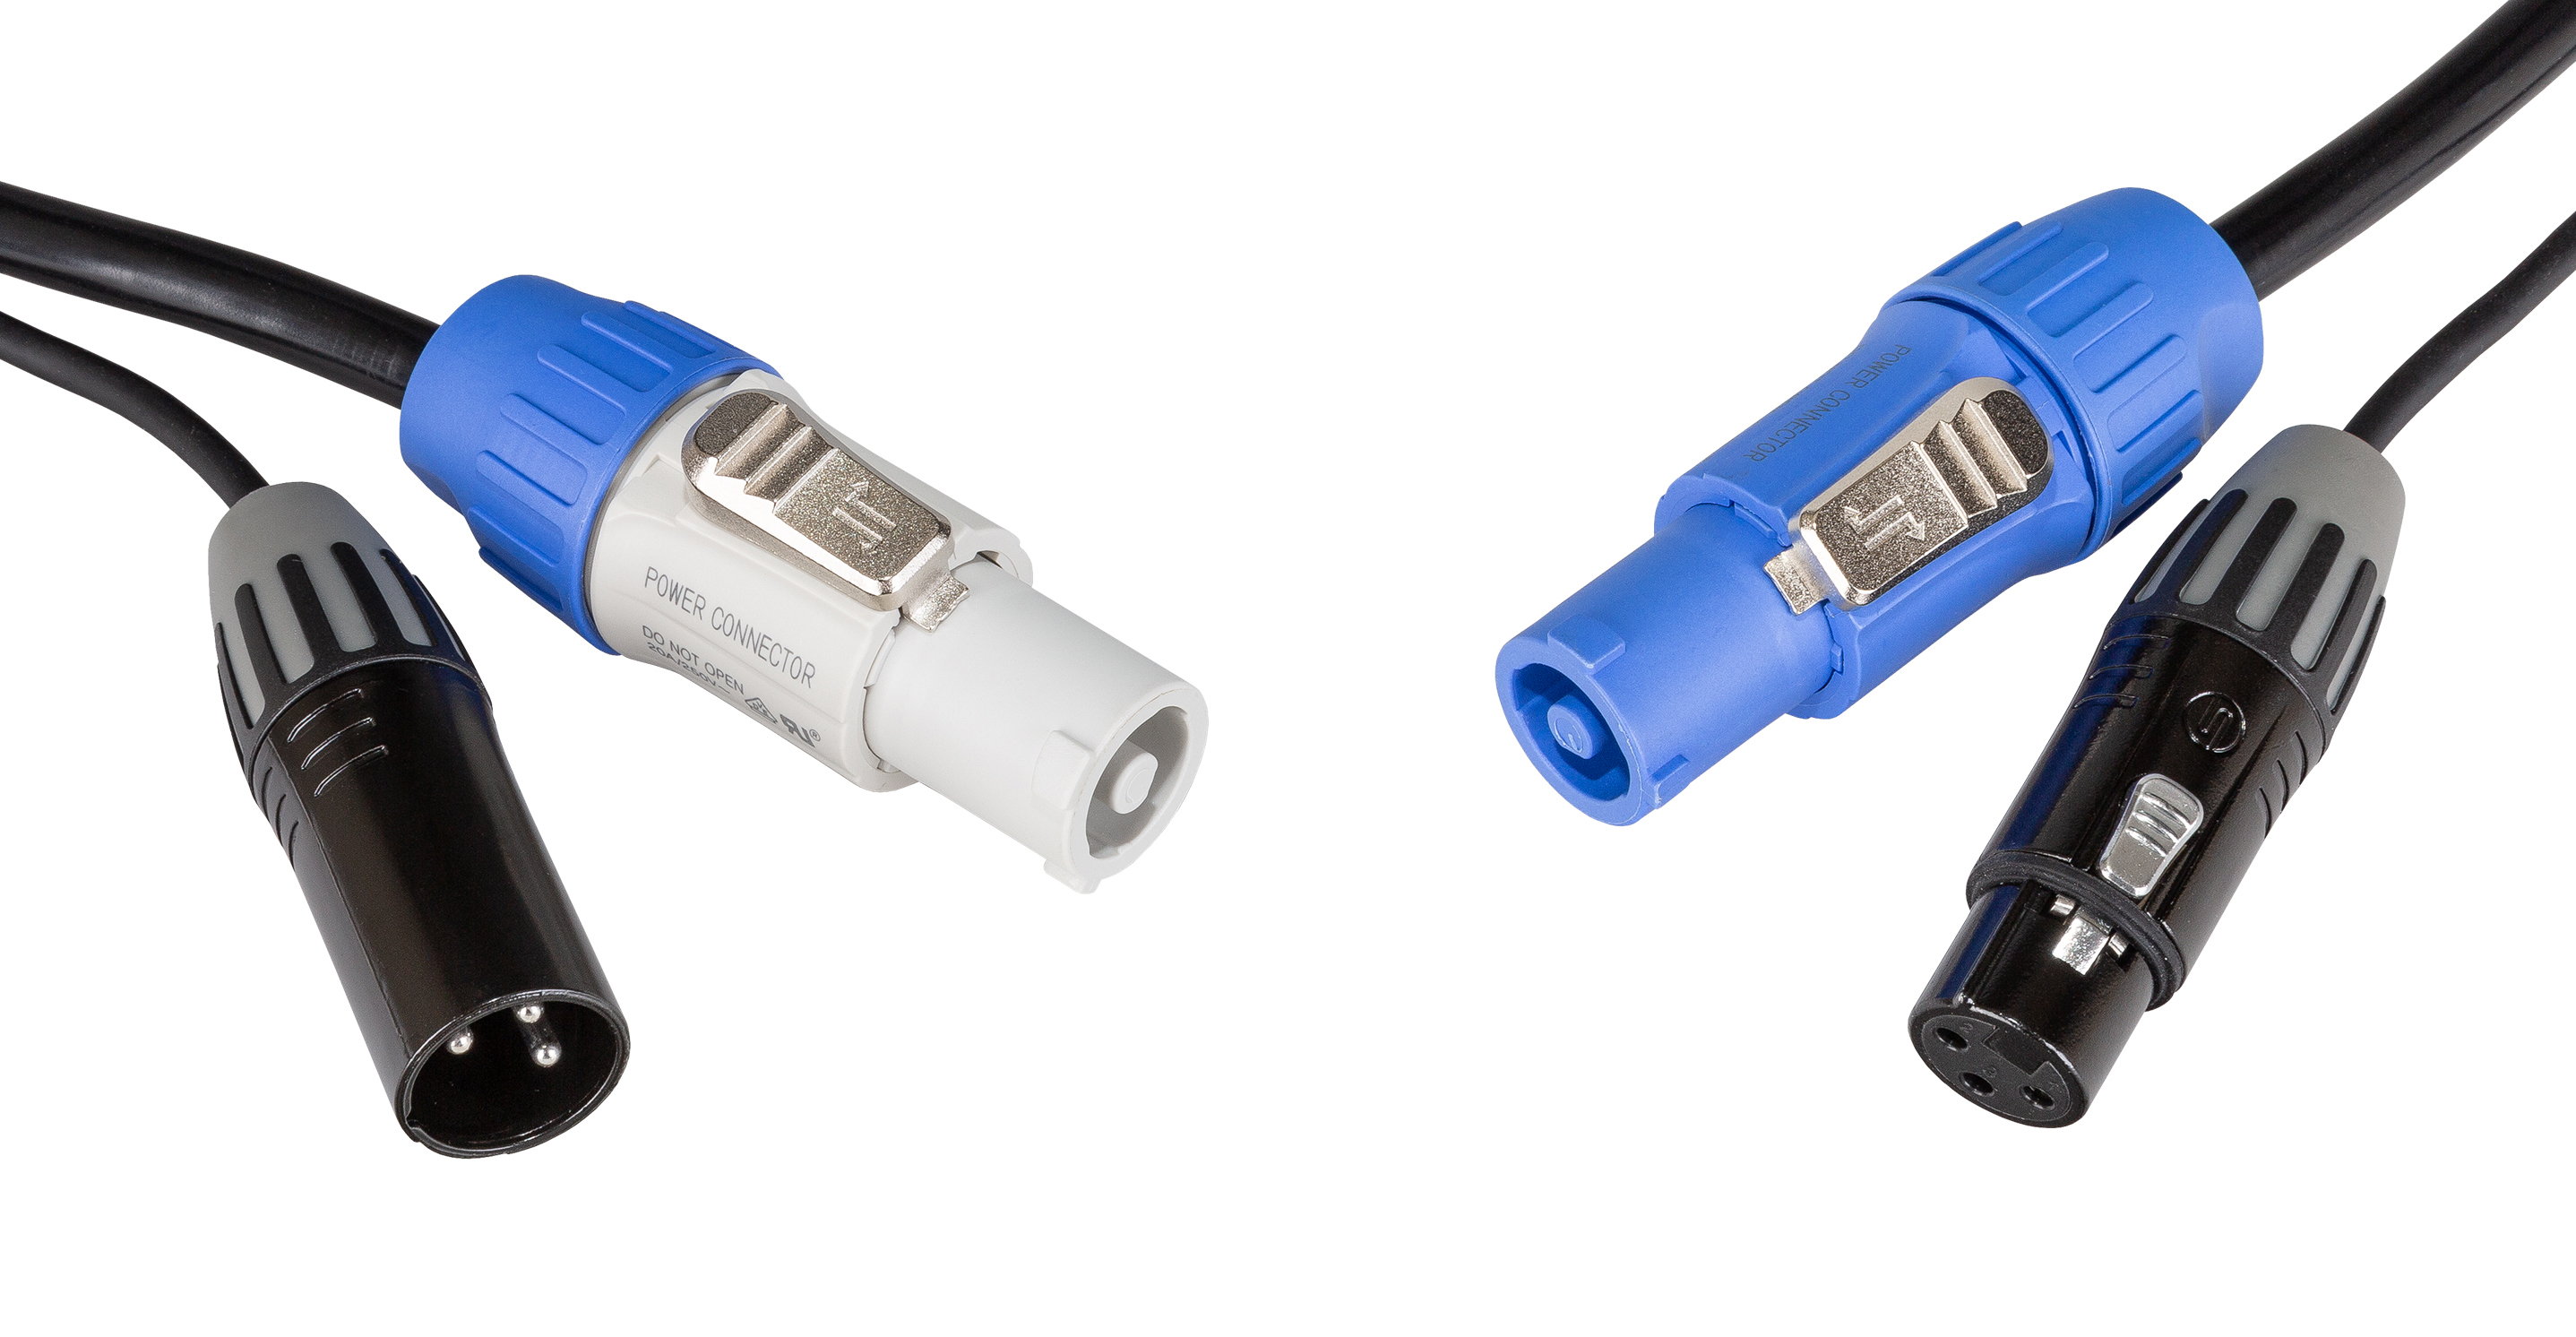 Combi cable with Seetronic XLR 3pin and Powercon compatible connectors, 5m